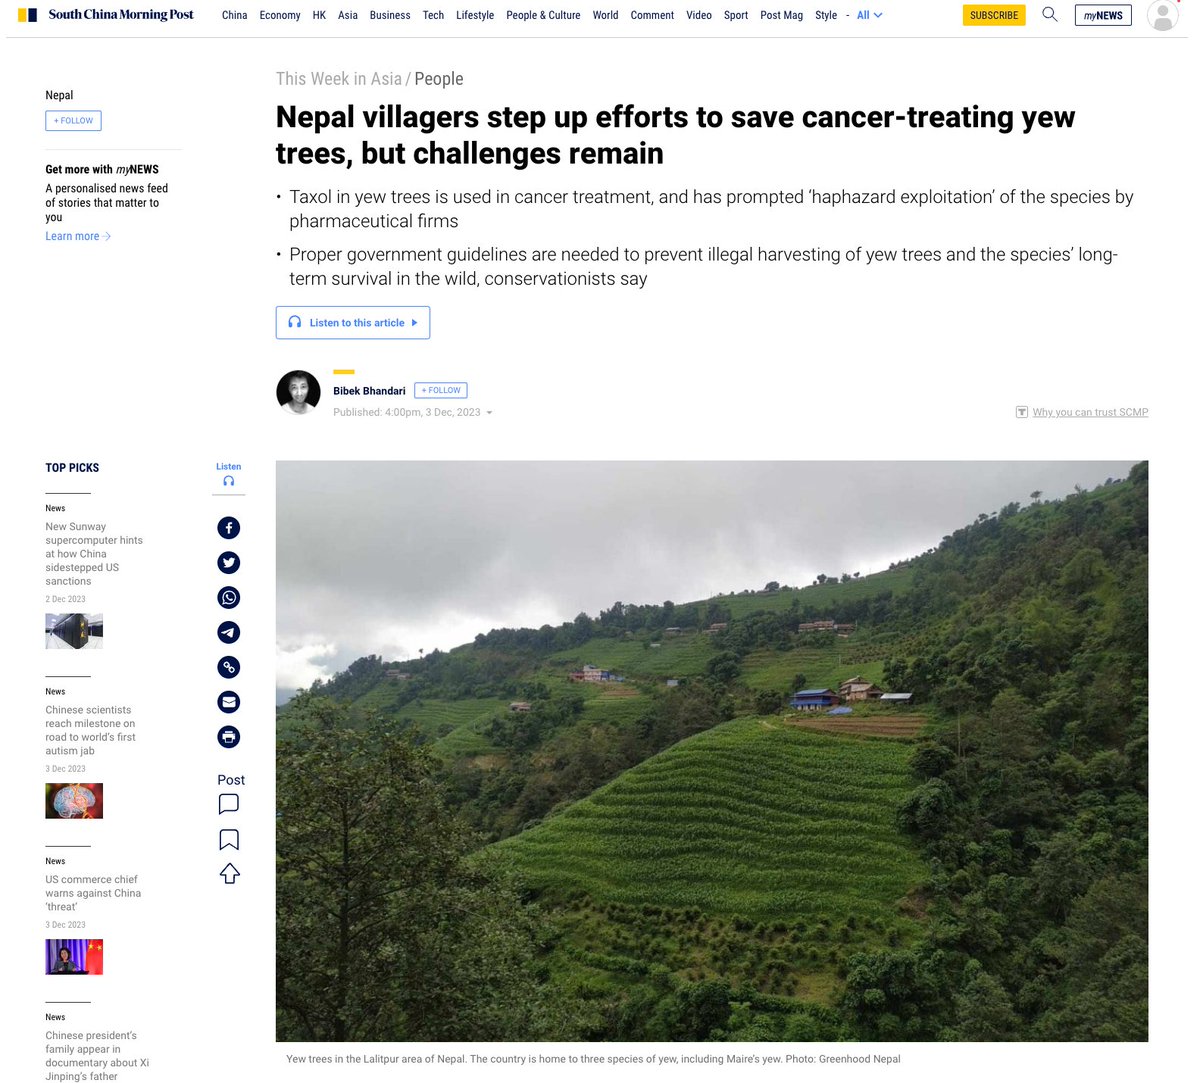 Our wild yew tree conservation work is featured by @SCMPNews @bibekbhandari. LINK - scmp.com/week-asia/peop… This initiative is supported by @CLPawards @EDGEofExistence with advisory support of @orchiddelirium @verissimodiogo #taxling